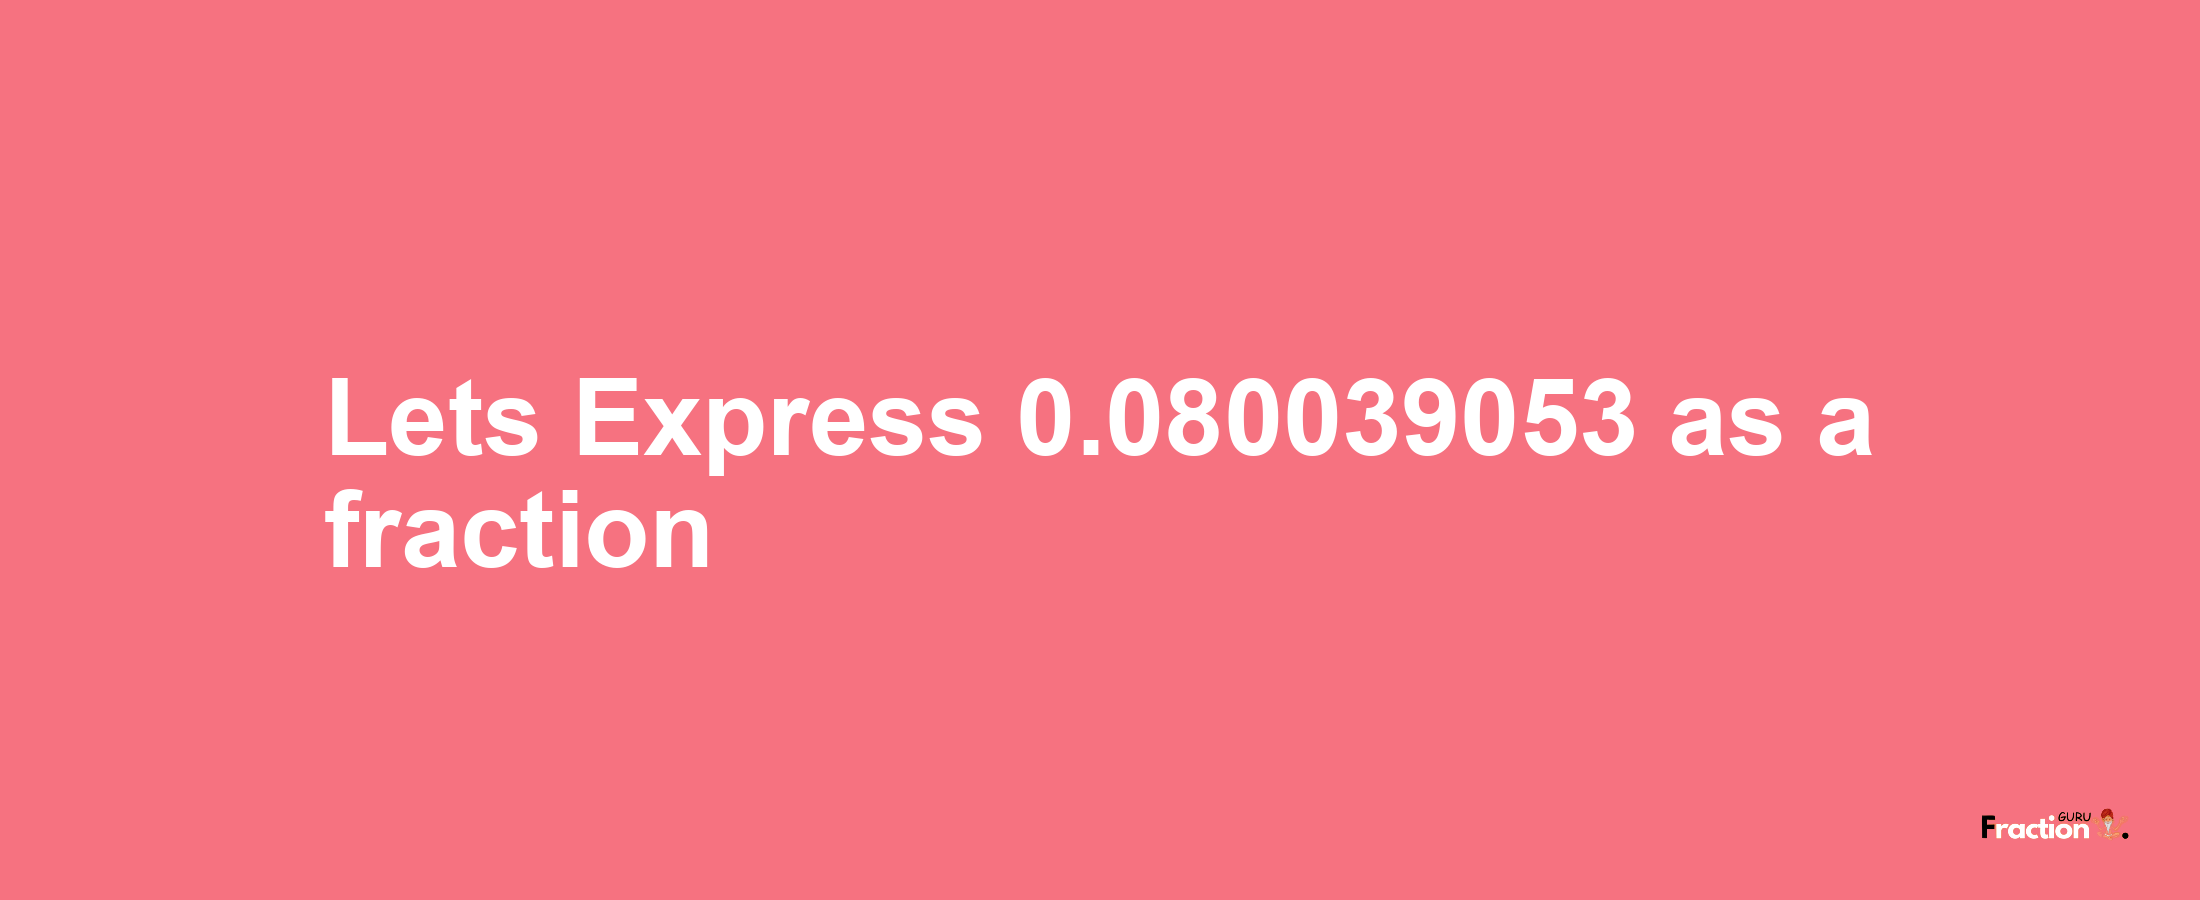 Lets Express 0.080039053 as afraction